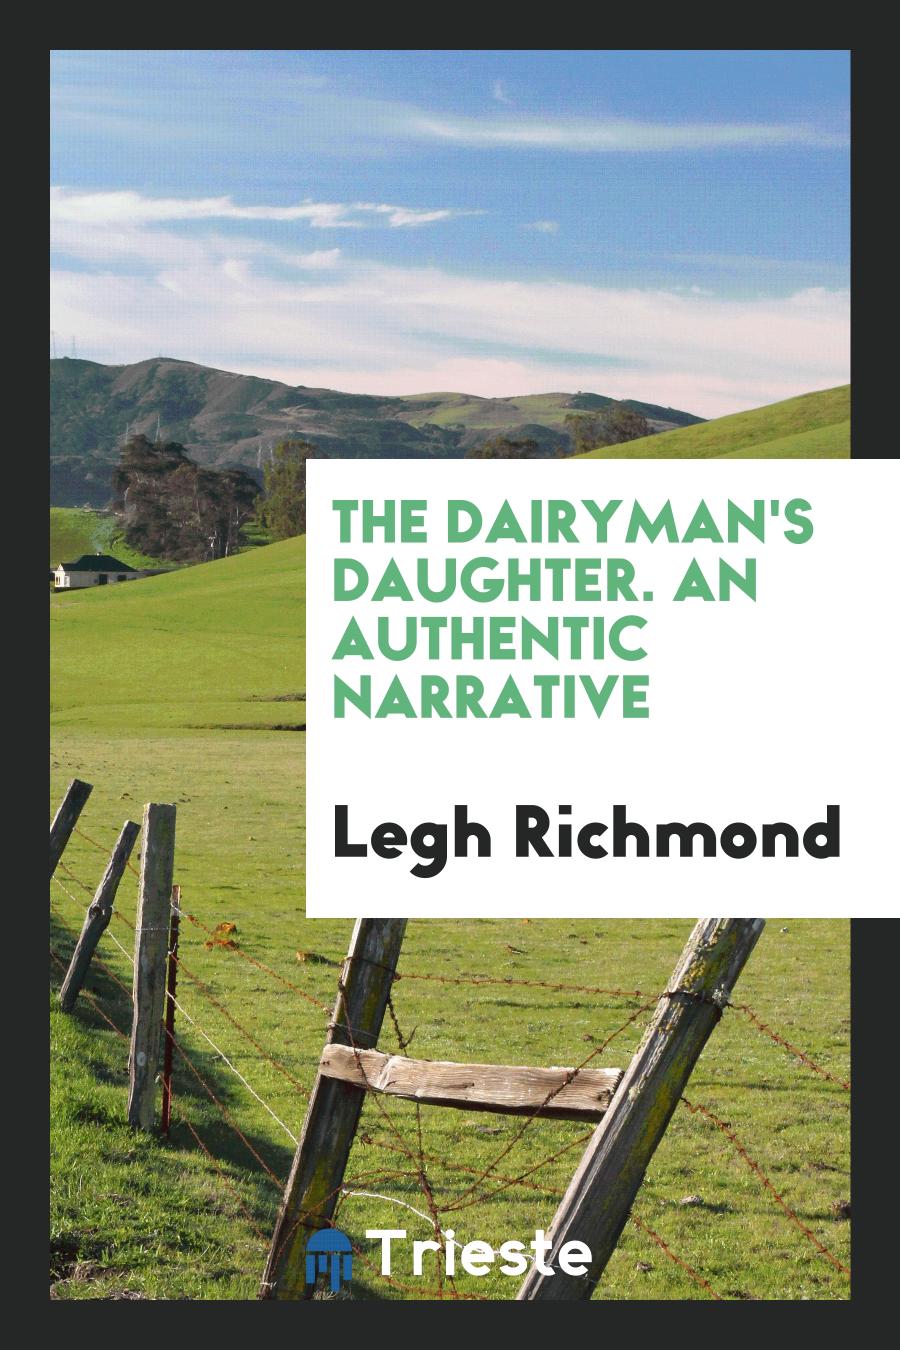 The Dairyman's Daughter. An Authentic Narrative